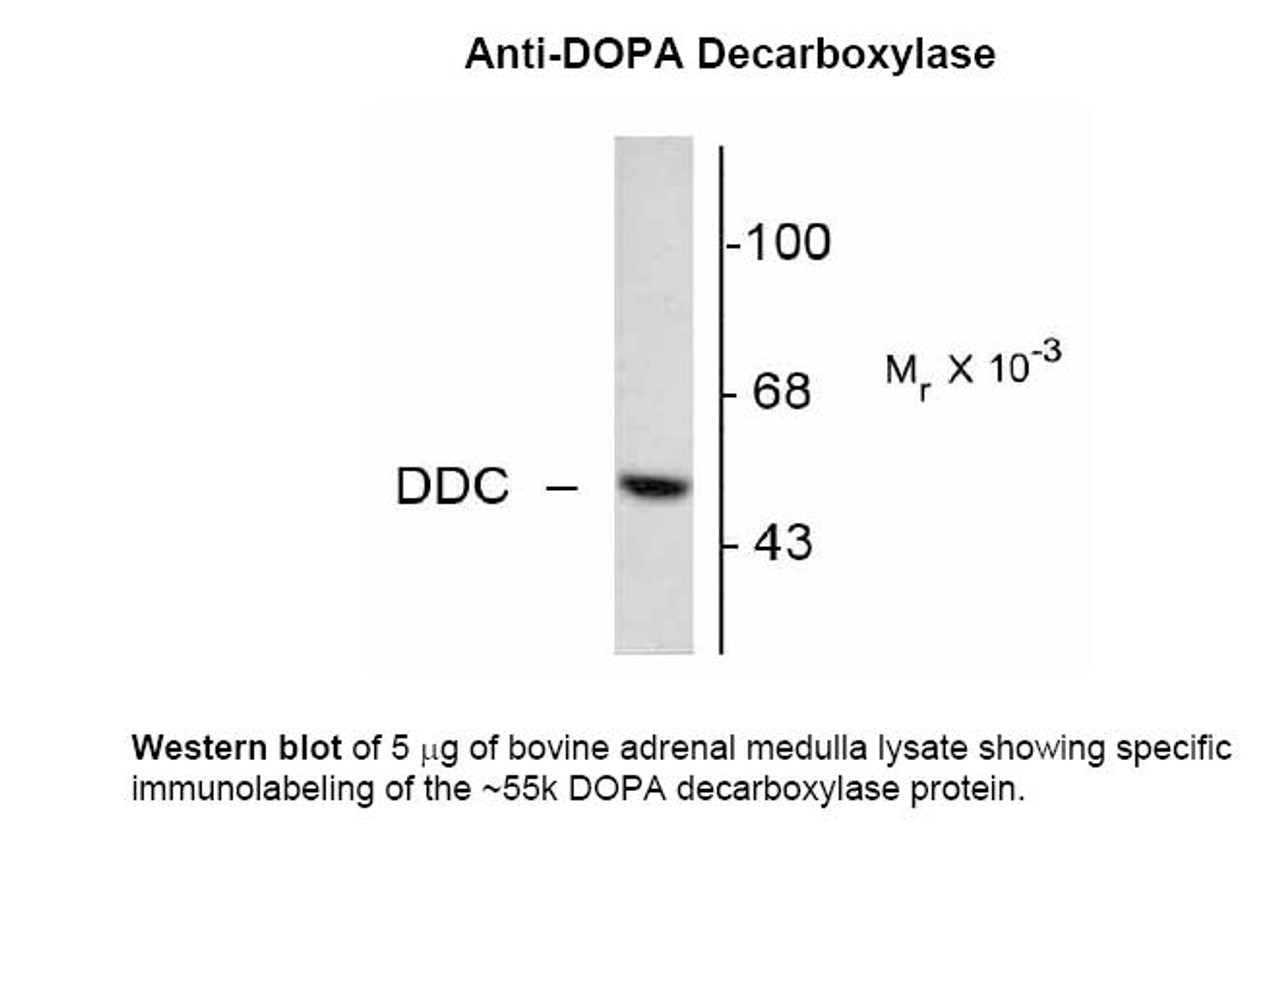 Western blot of 5 μg of bovine adrenal medulla lysate showing specific immunolabeling of the ~55k DOPA decarboxylase protein.